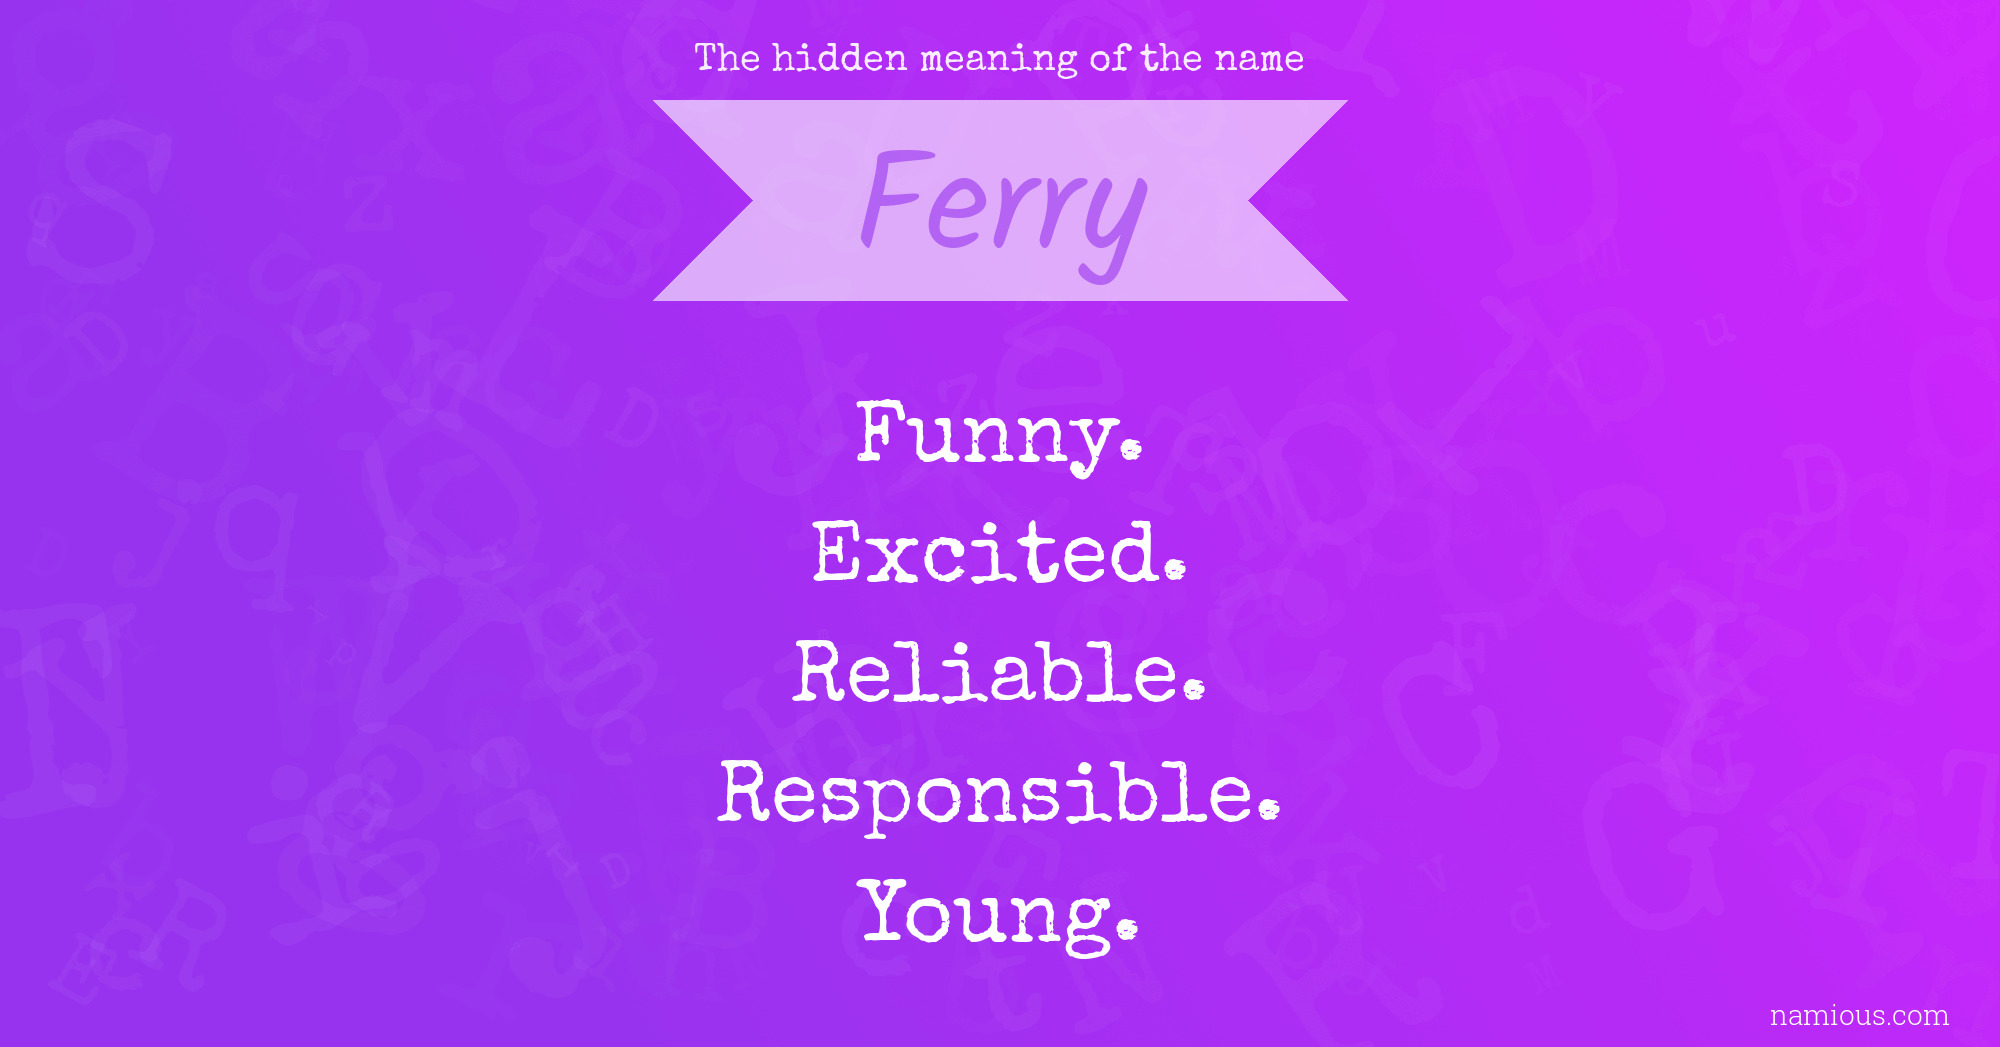 The hidden meaning of the name Ferry